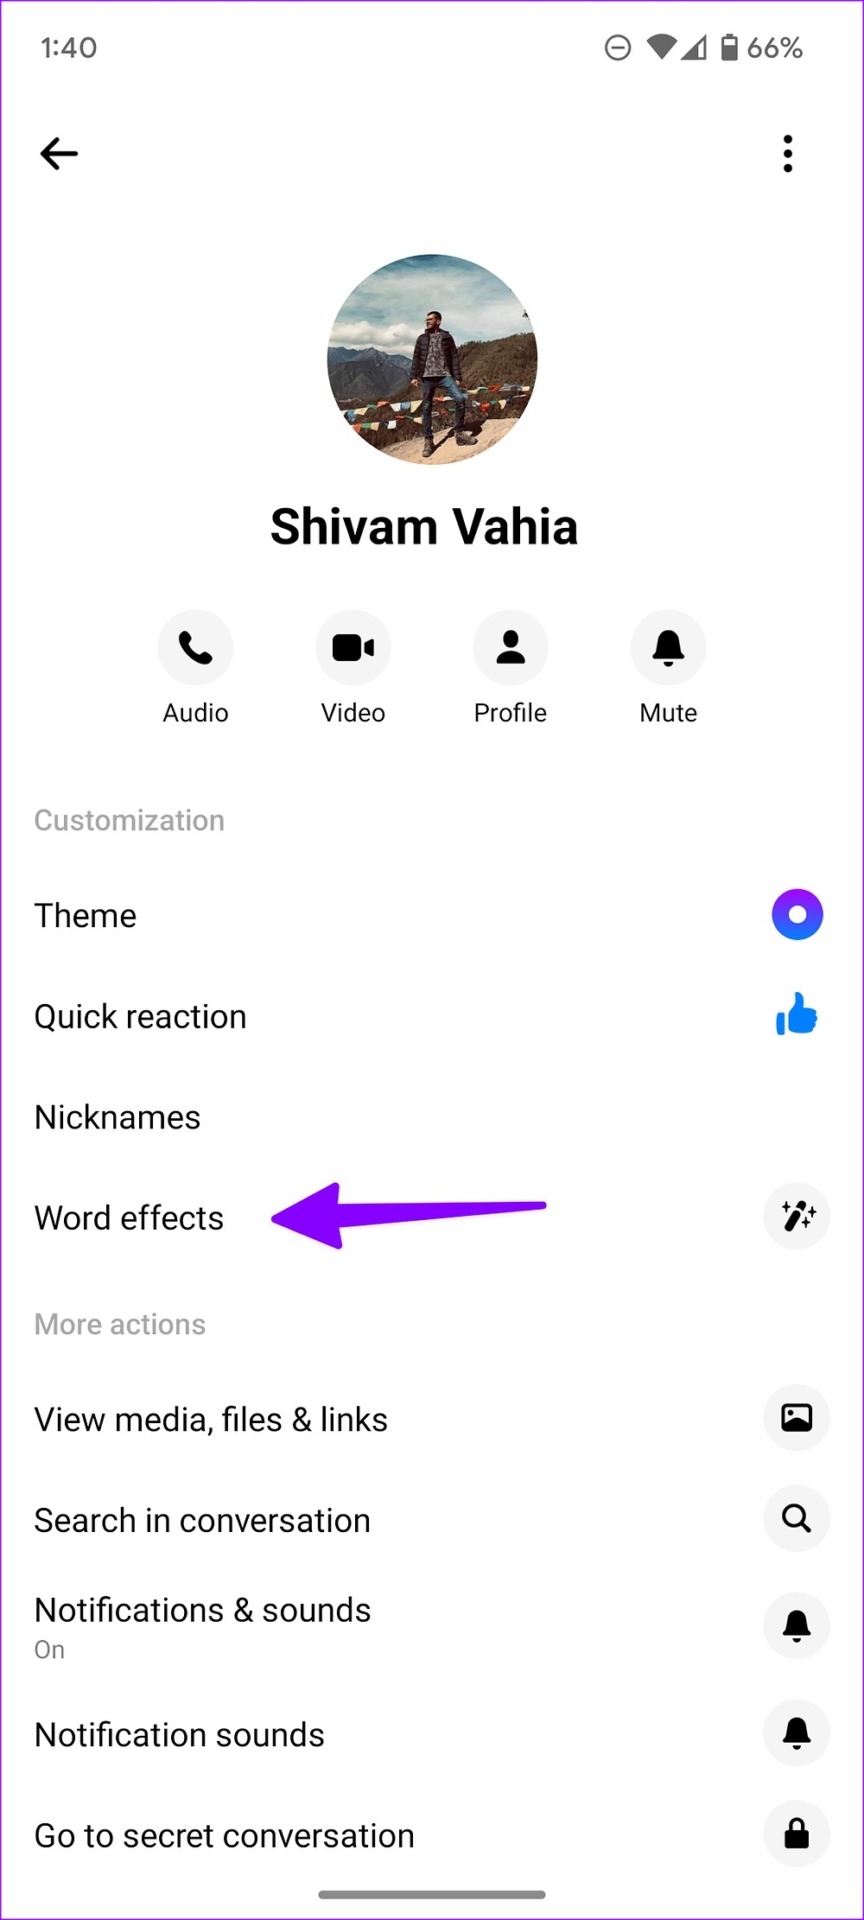 Select Word effects